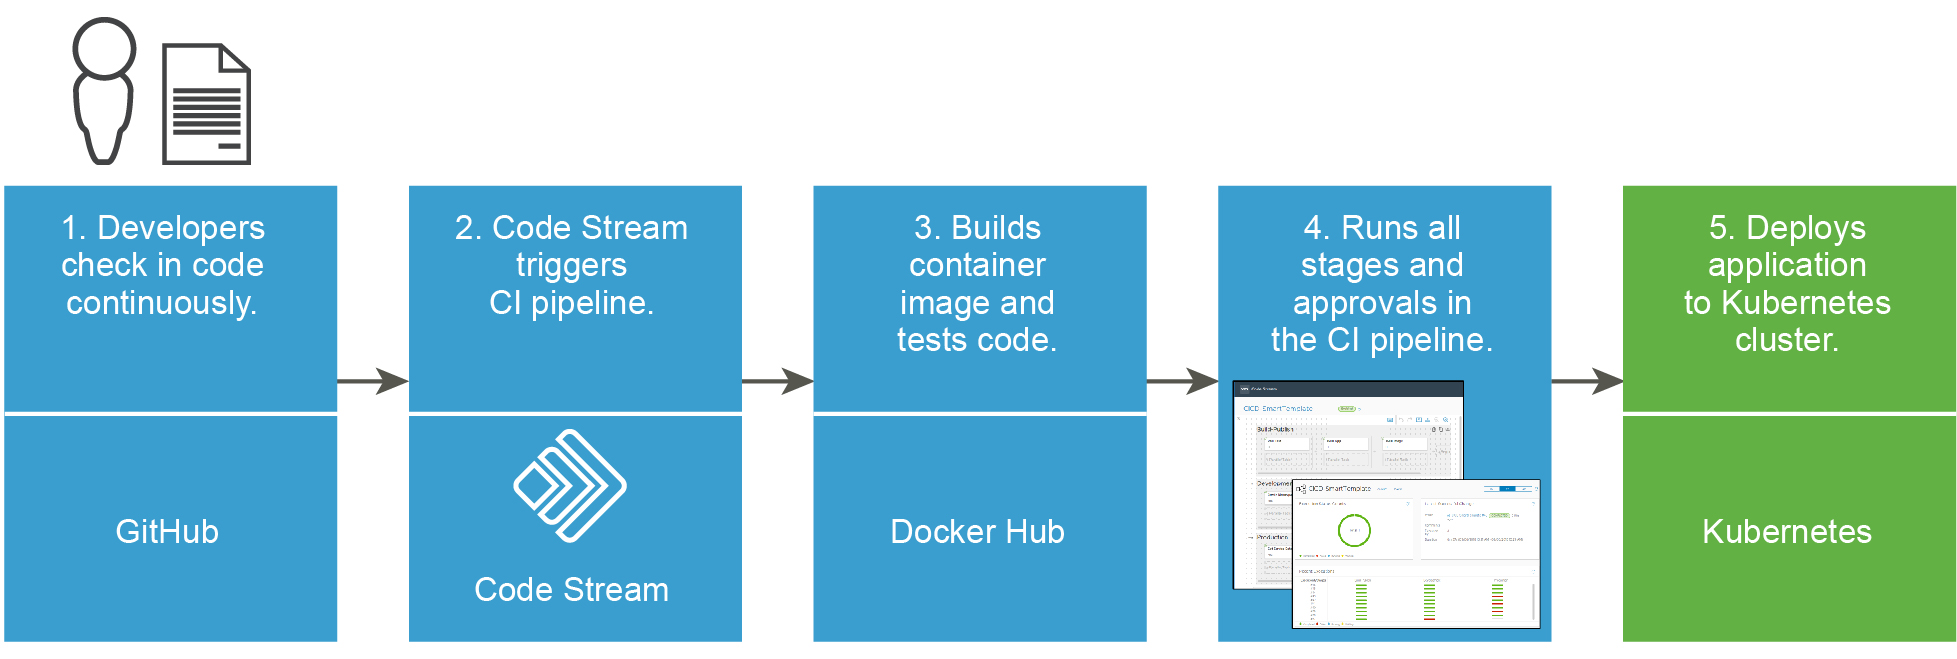 The workflow from a code check-in to a deployed application on a Kubernetes cluster can use GitHub, Code Stream, Docker Hub, the trigger for Git, and Kubernetes.